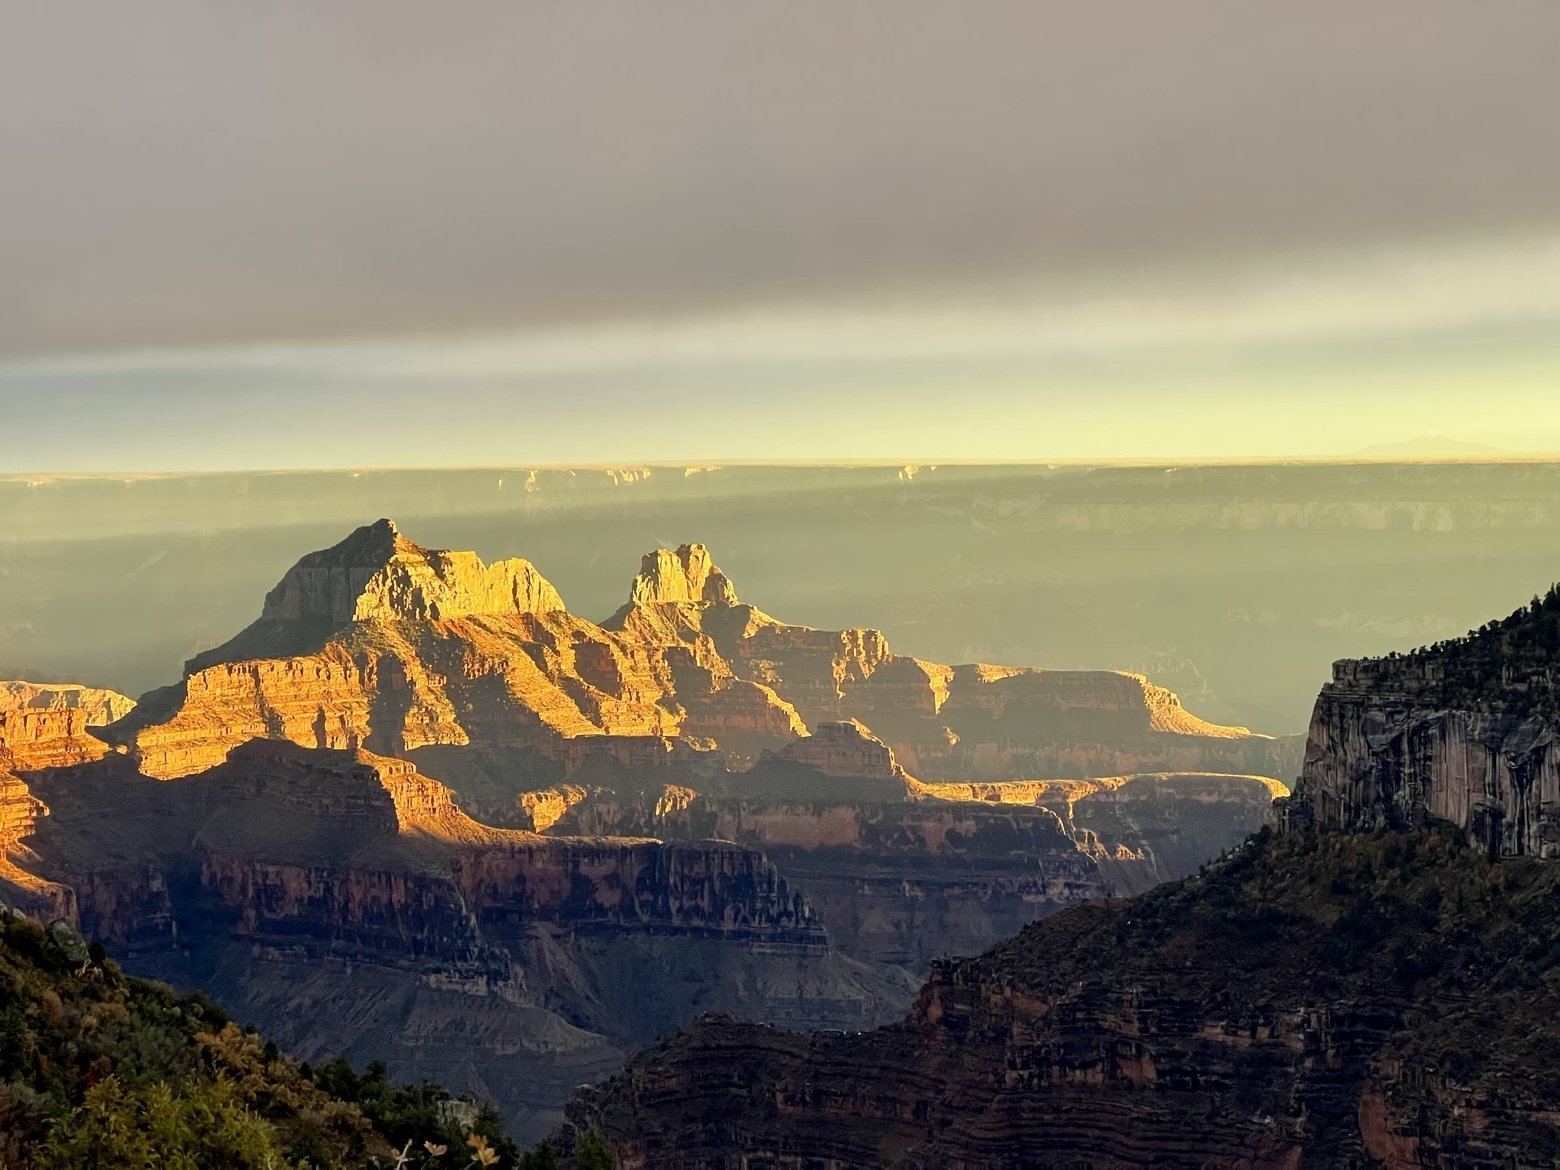 Sunset on the Temples above Bright Angel Canyon